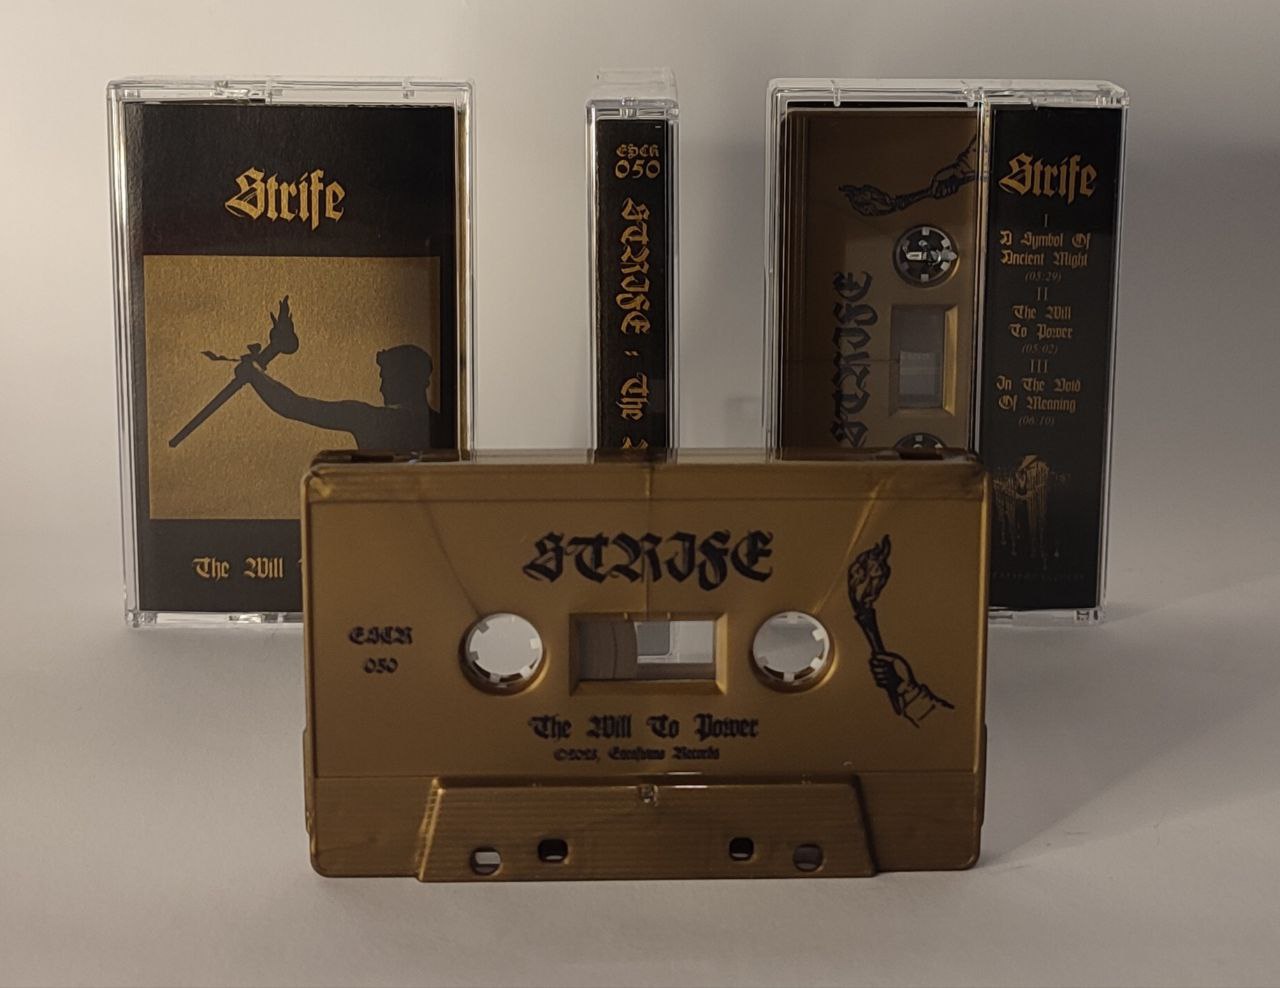 ESCR-050: Strife (ES) "The Will To Power" - Pro tape